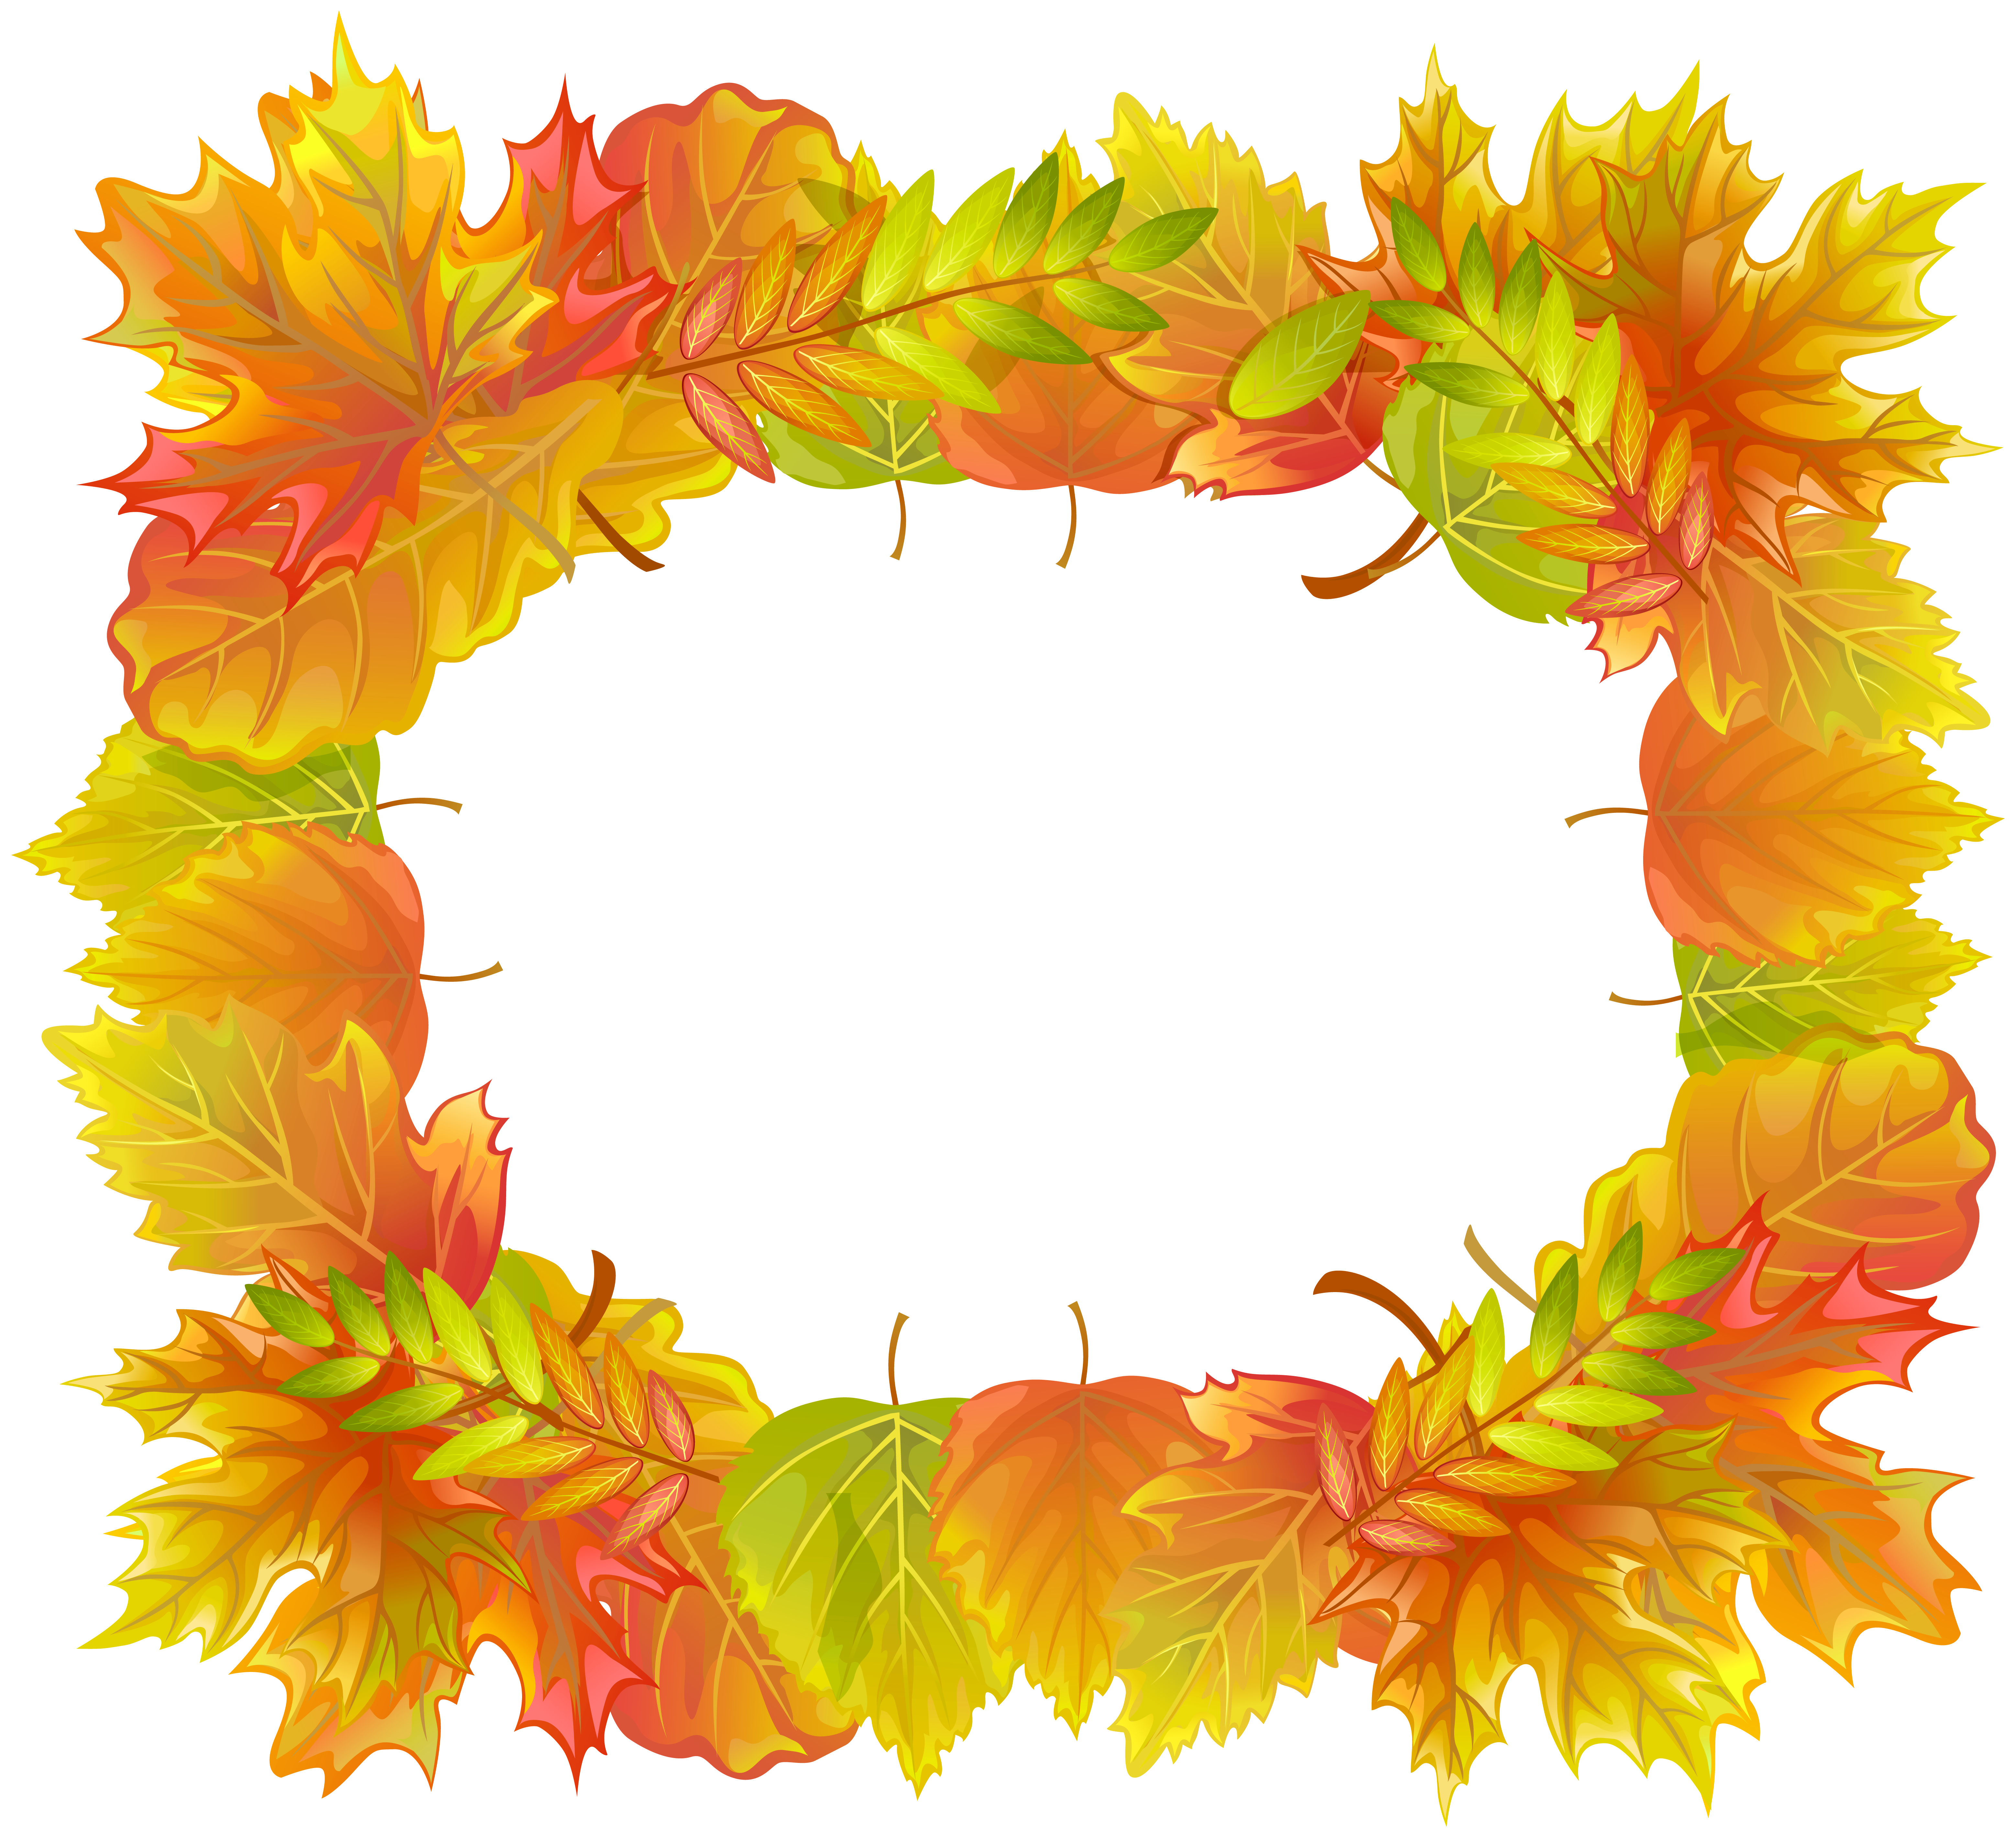 Fall border png. Autumn leafs frame clipart